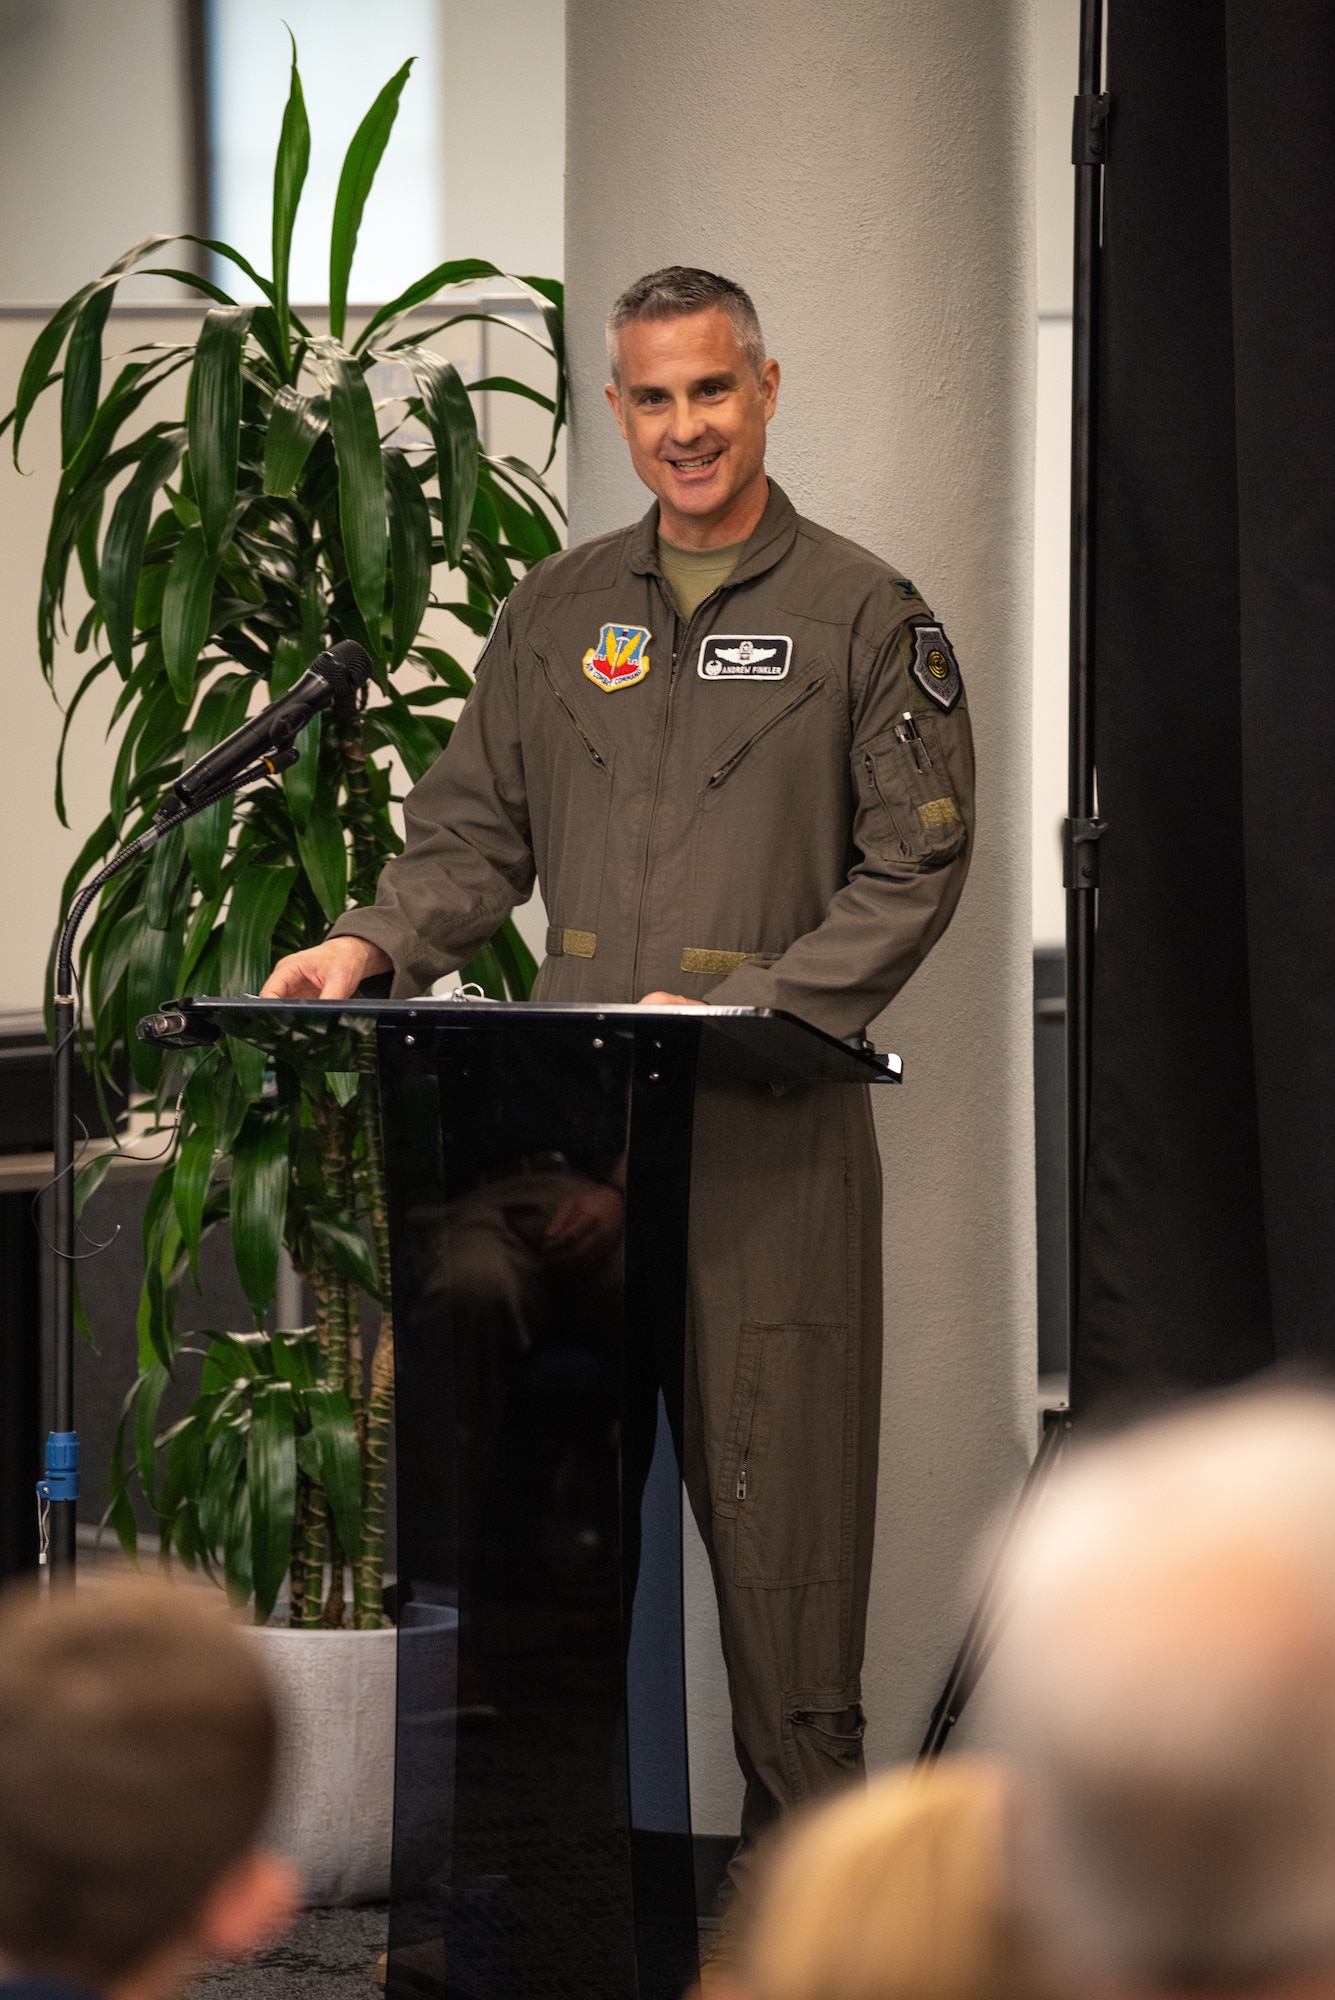 U.S. Air Force Col. Andrew J. Finkler, 850th Spectrum Warfare Group commander, delivers opening remarks during the reactivation ceremony for 563rd Electronic Warfare Squadron, San Antonio, Texas, April 25, 2024. The 563rd EWS develops, delivers and maintains software capabilities to execute an electronic warfare mission in support of the Air Force. (U.S. Air Force photo by Jarrod M. Vickers)